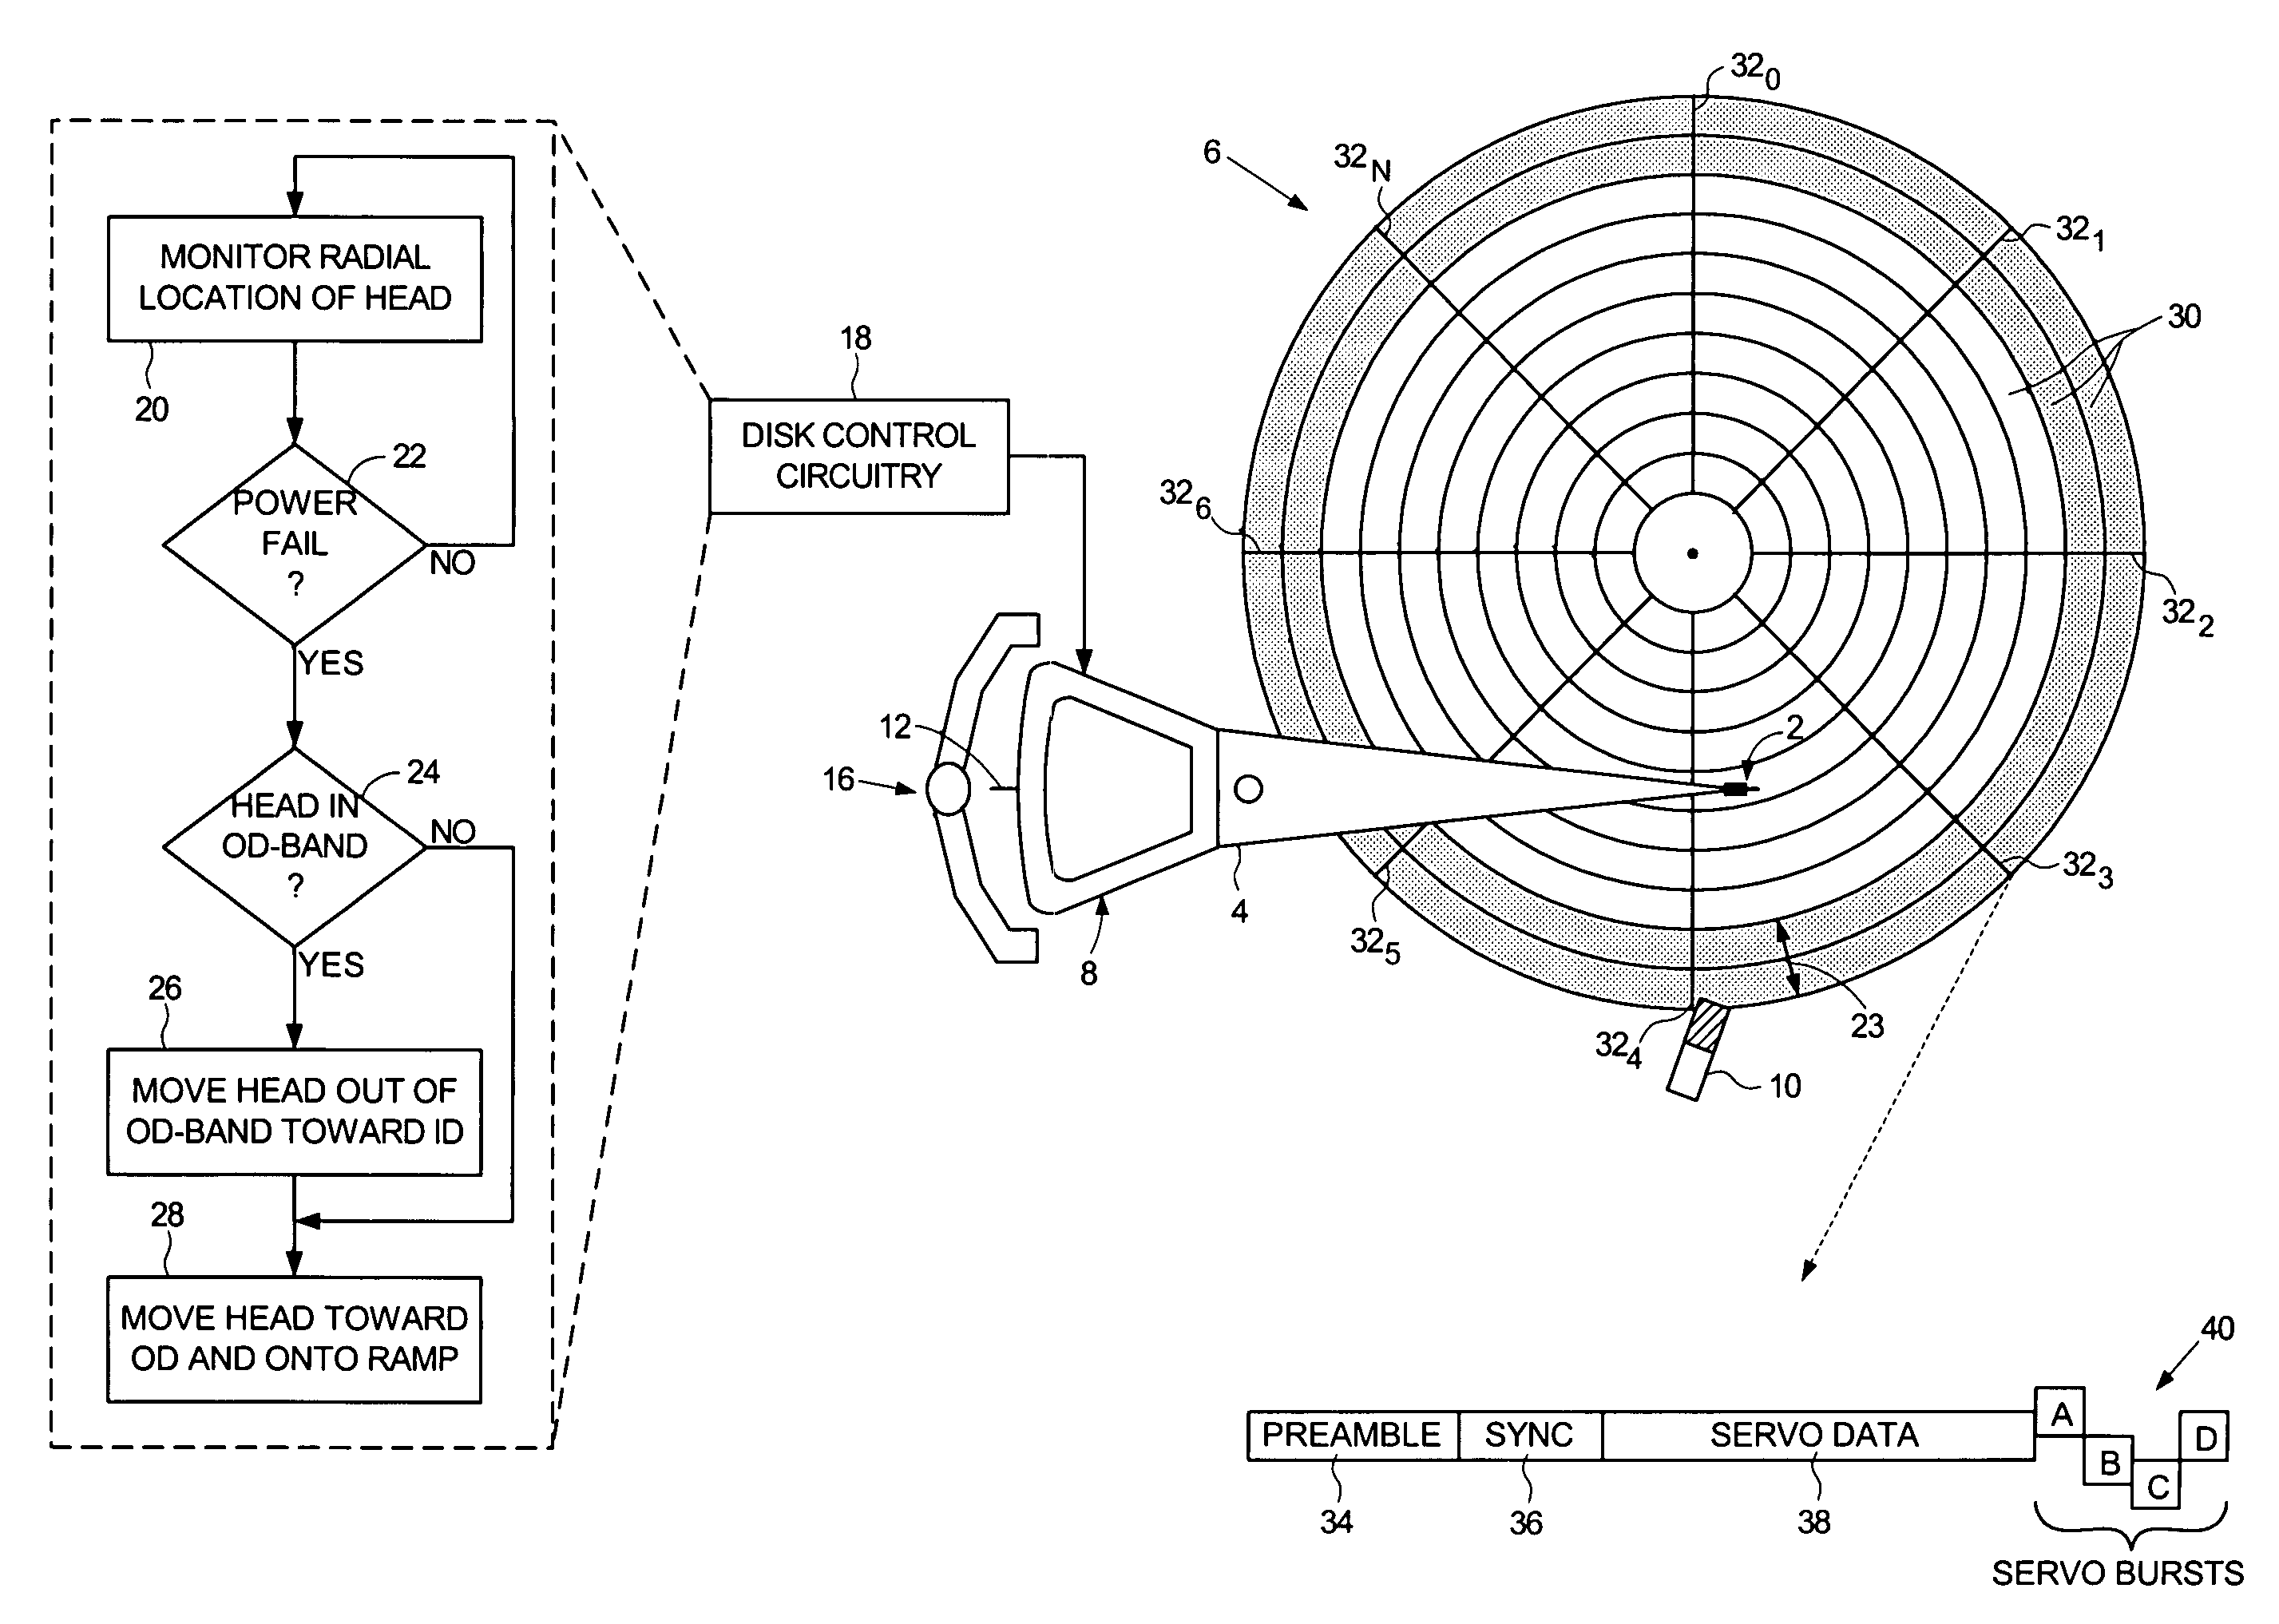 Disk drive employing momentum based unload during power failure